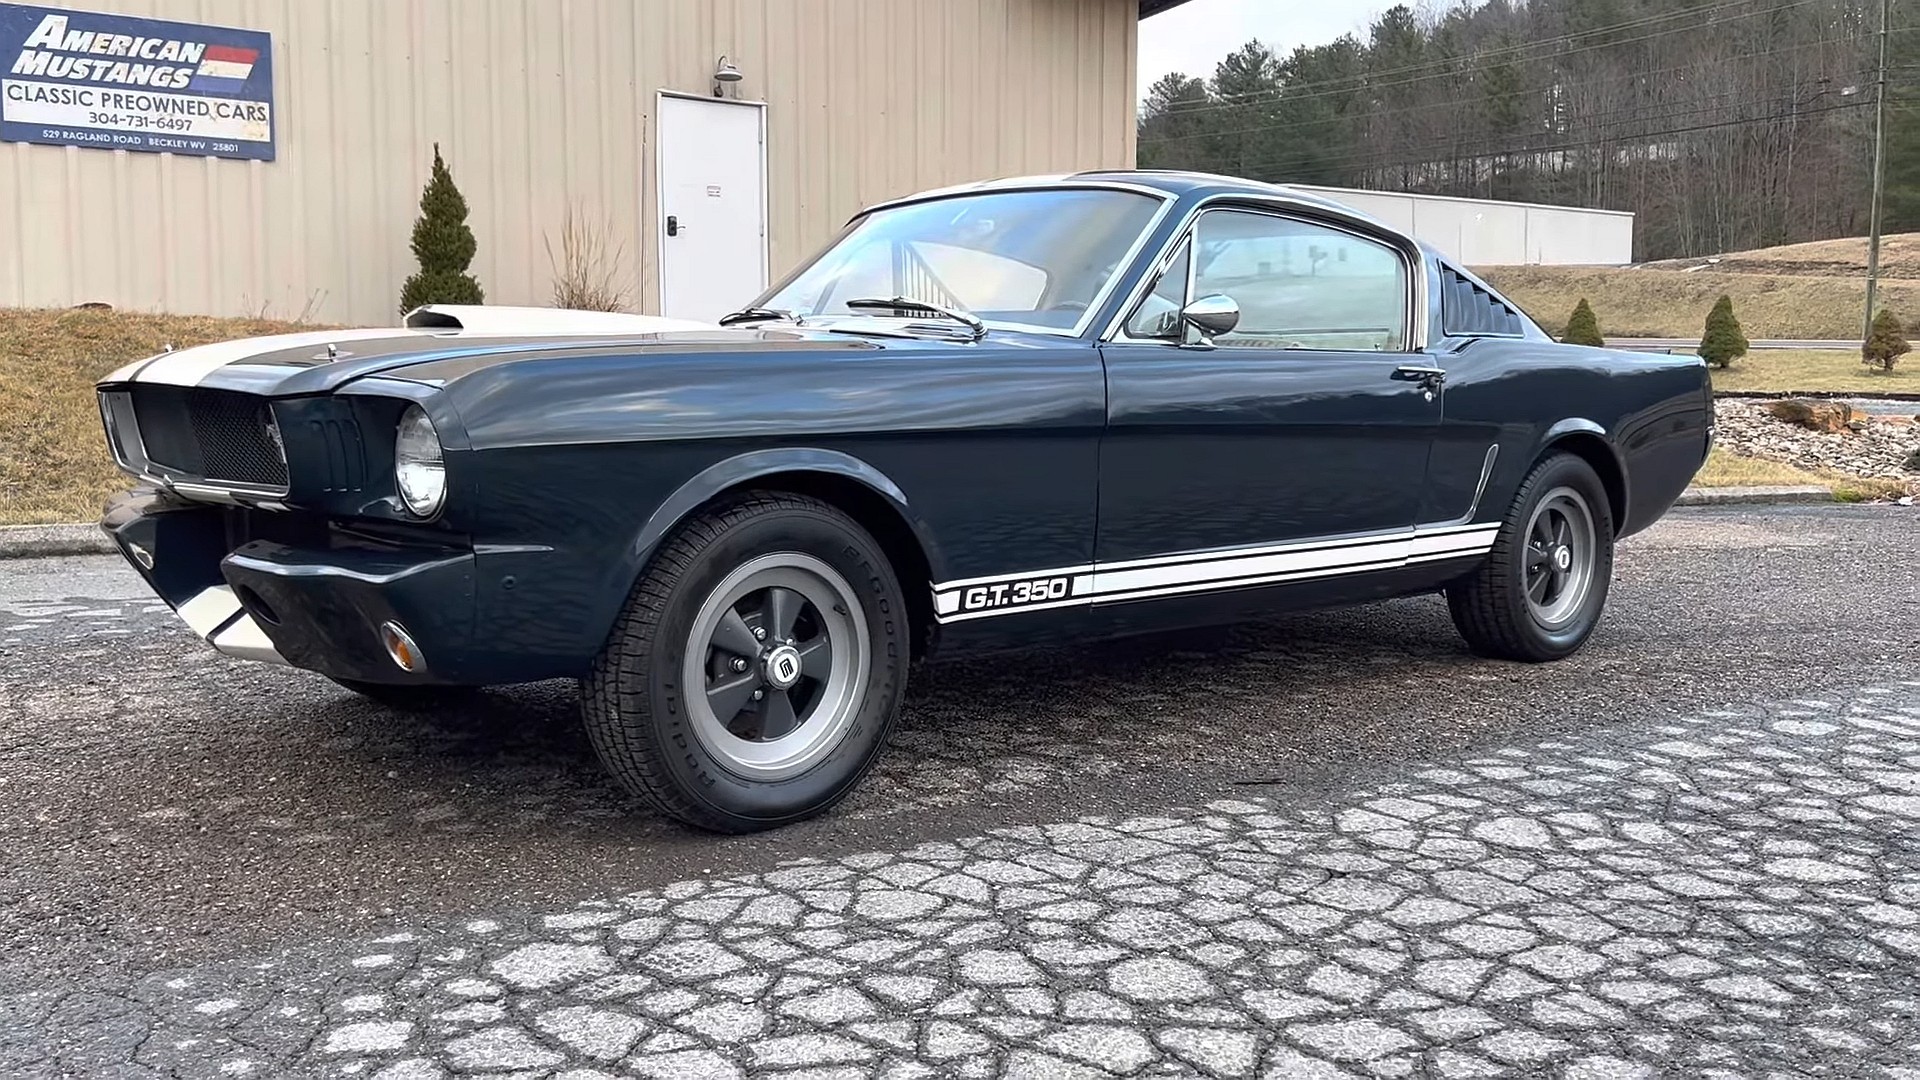 1965 Shelby GT350 in Nightmist Blue Looks Like a One-Off Gem, but There's a Catch - autoevolution